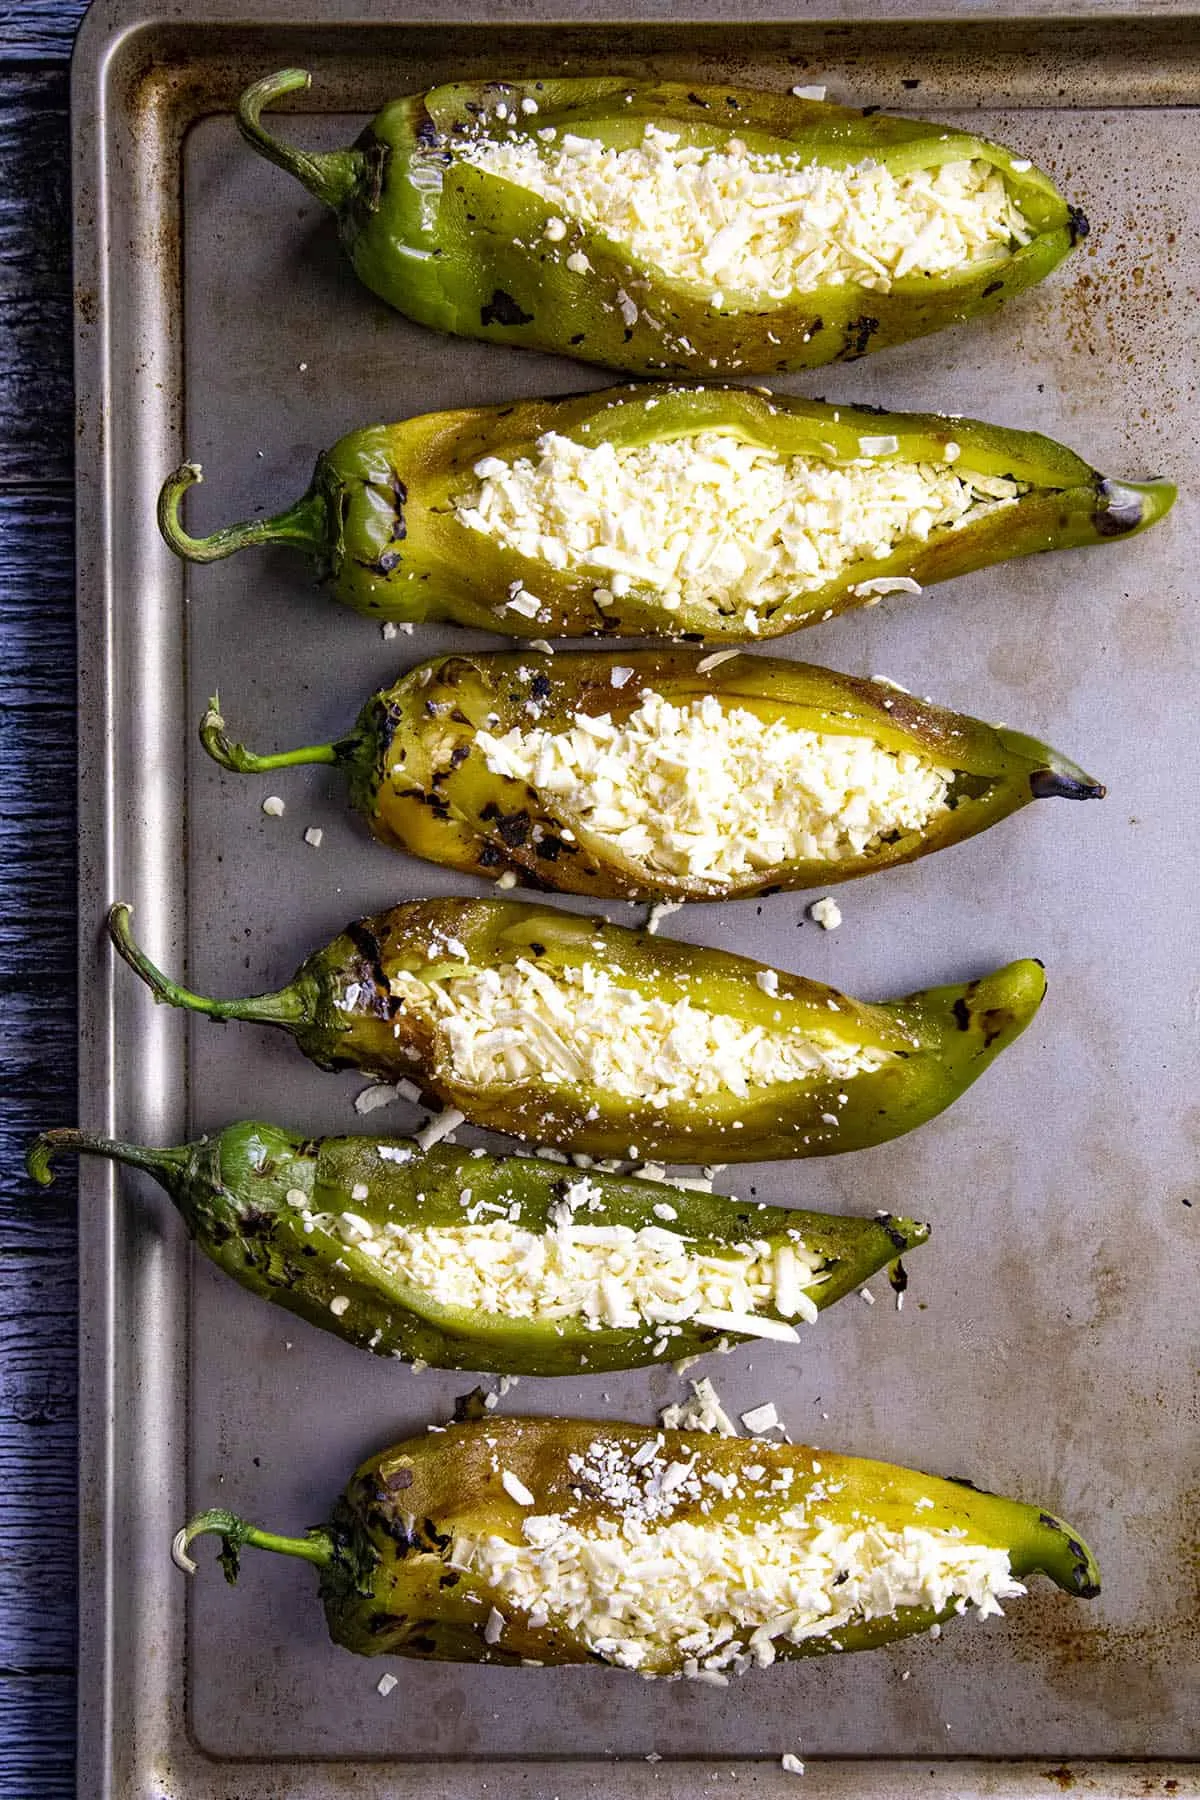 Stuffing roasted chiles with melty cheese